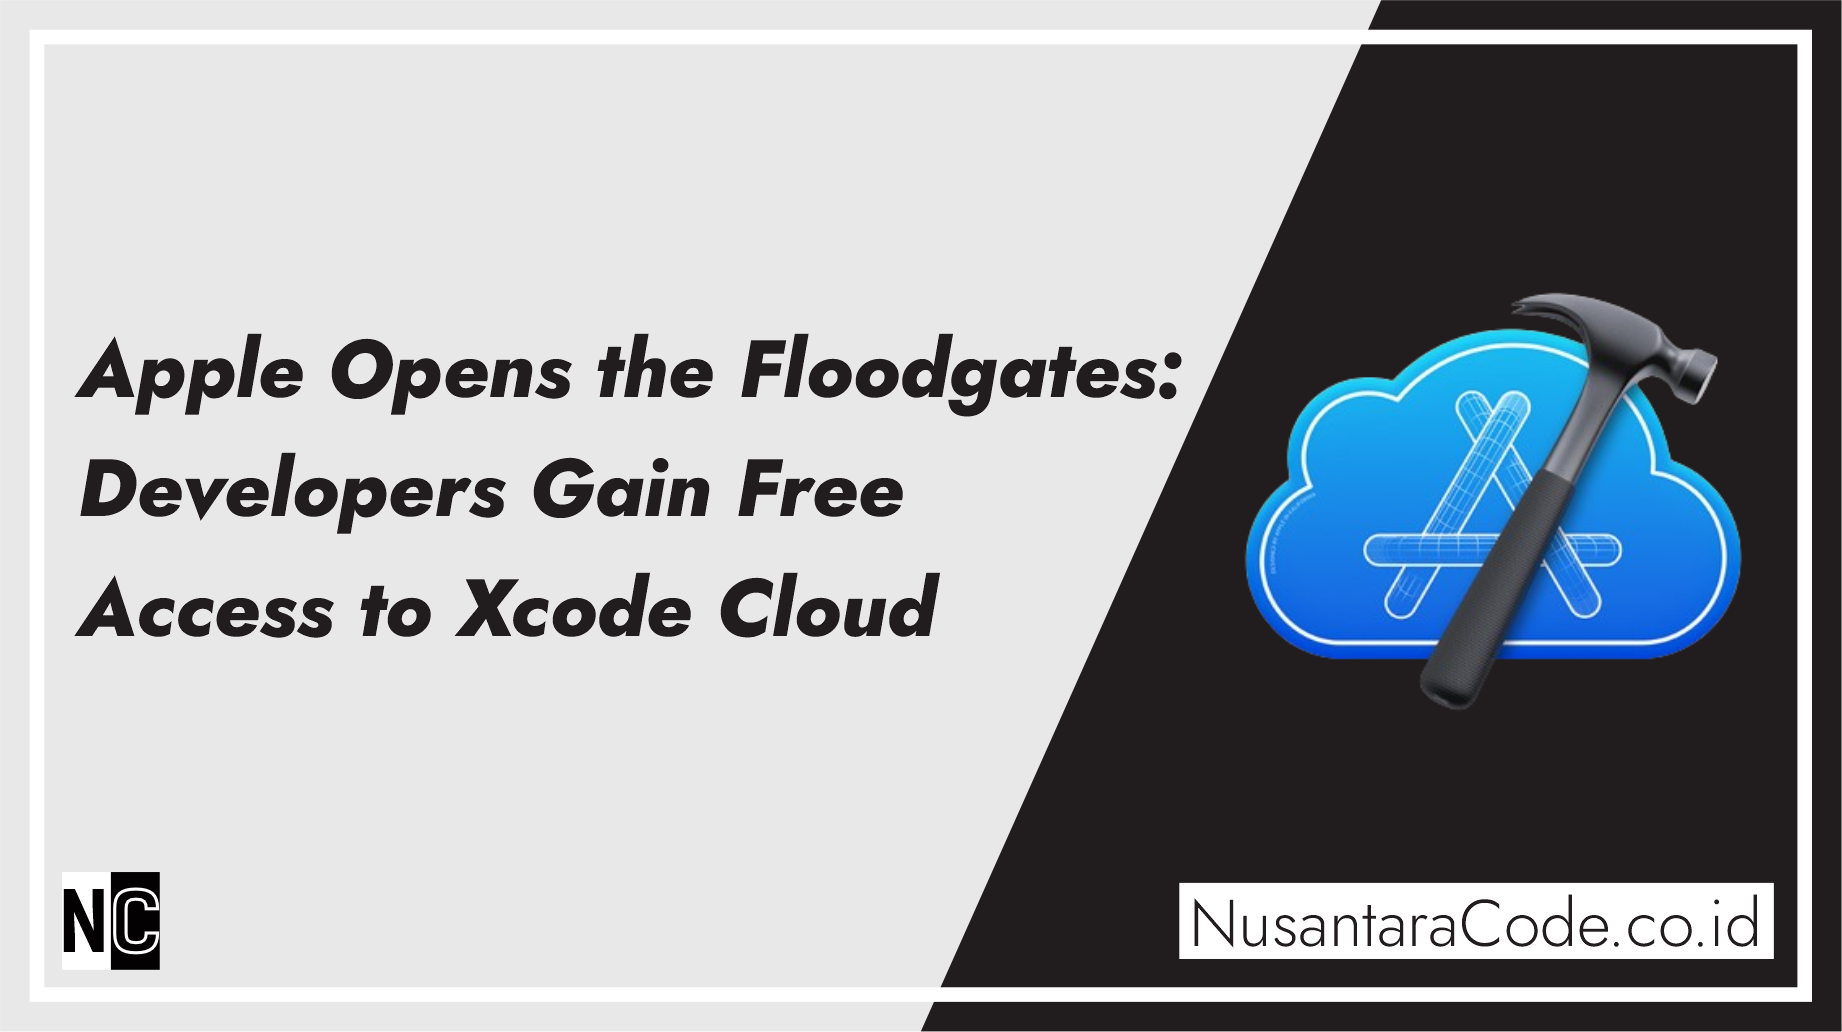 Apple Opens the Floodgates: Developers Gain Free Access to Xcode Cloud